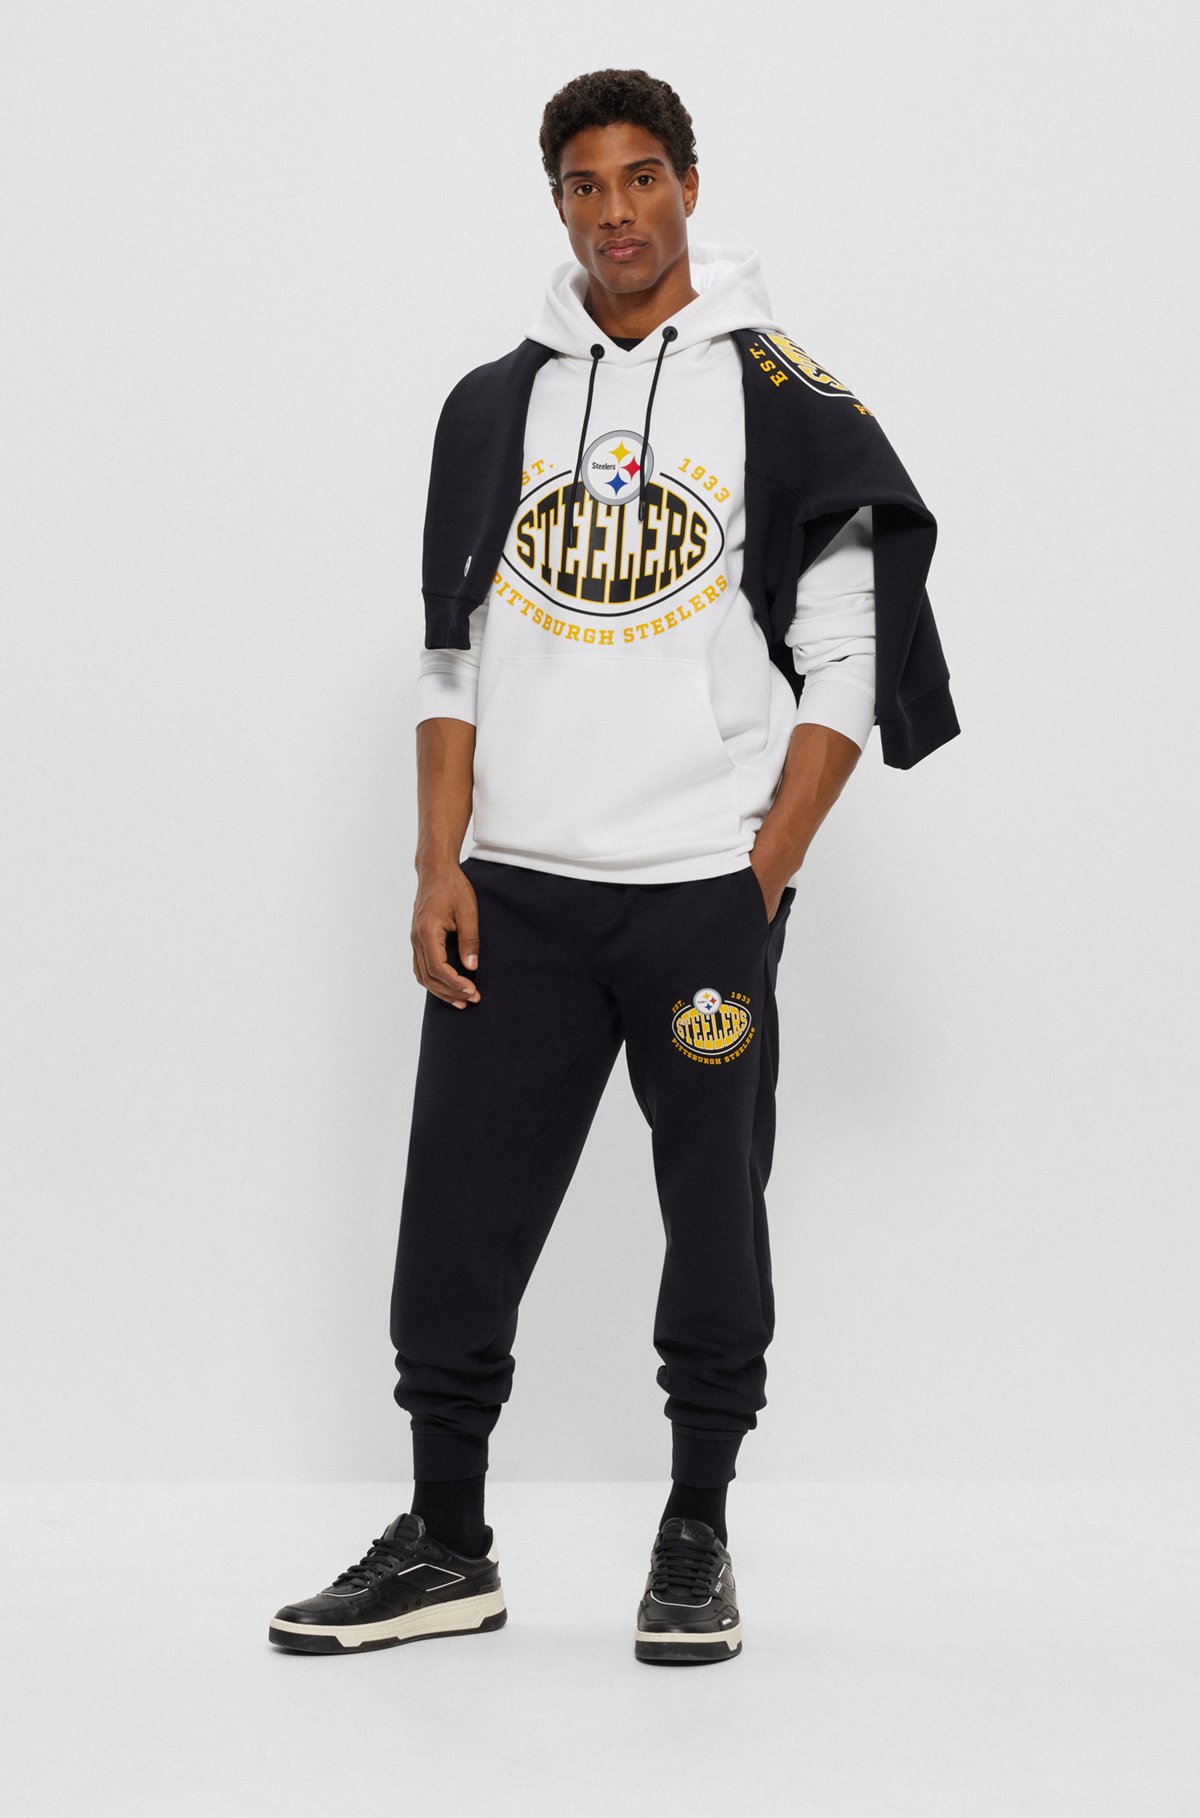  BOSS x NFL cotton-blend hoodie with collaborative branding, Steelers